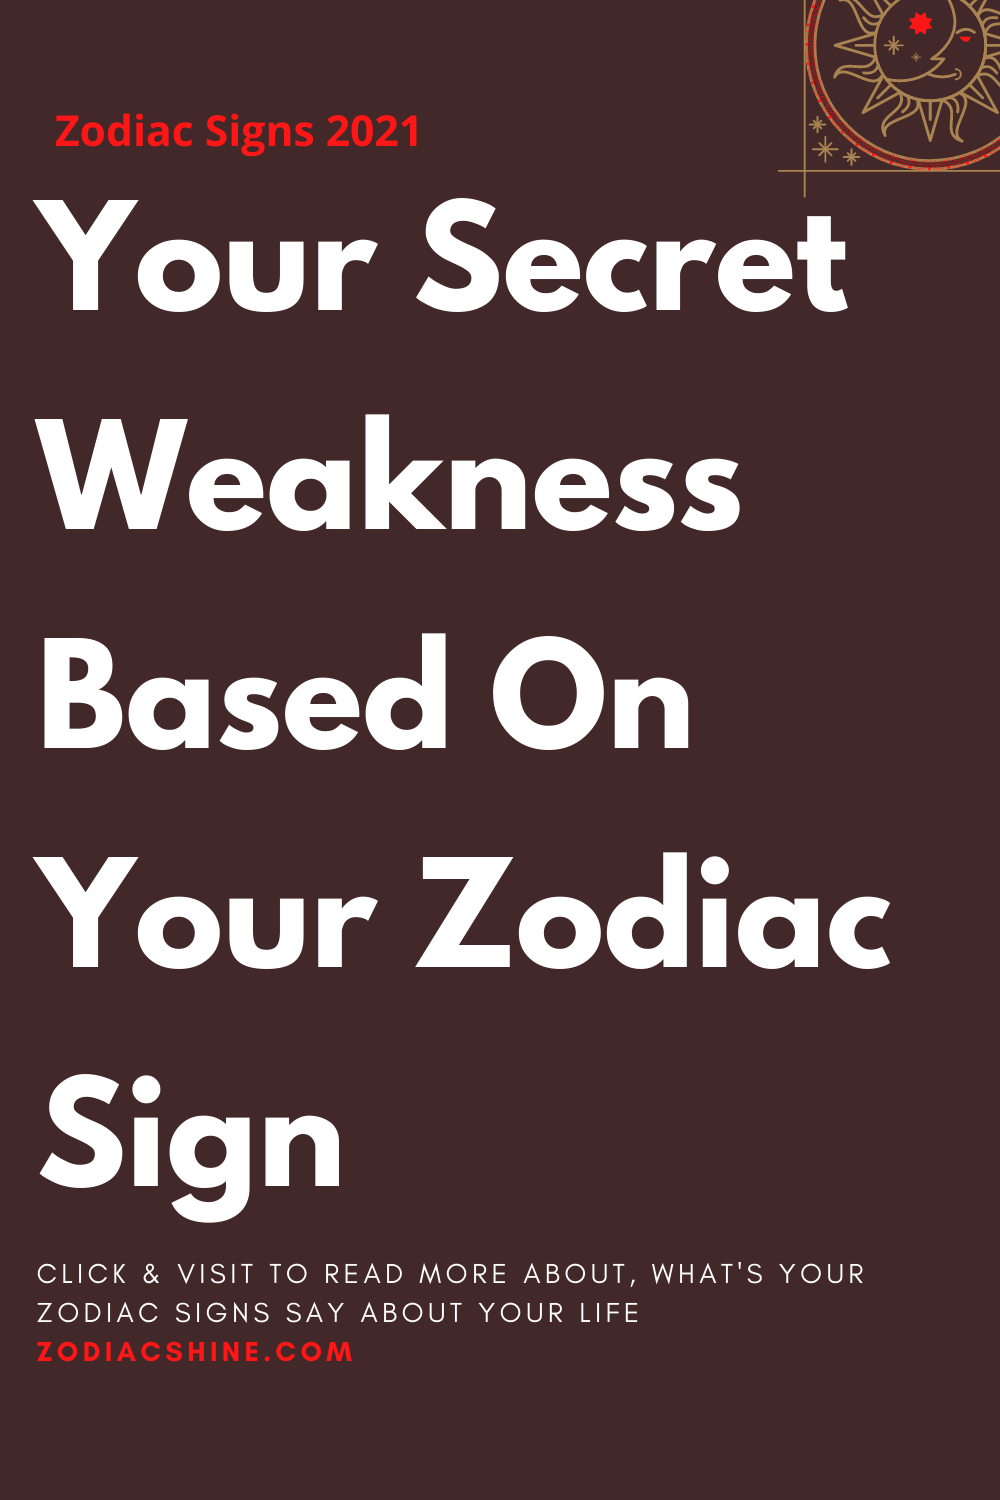 Your Secret Weakness Based On Your Zodiac Sign